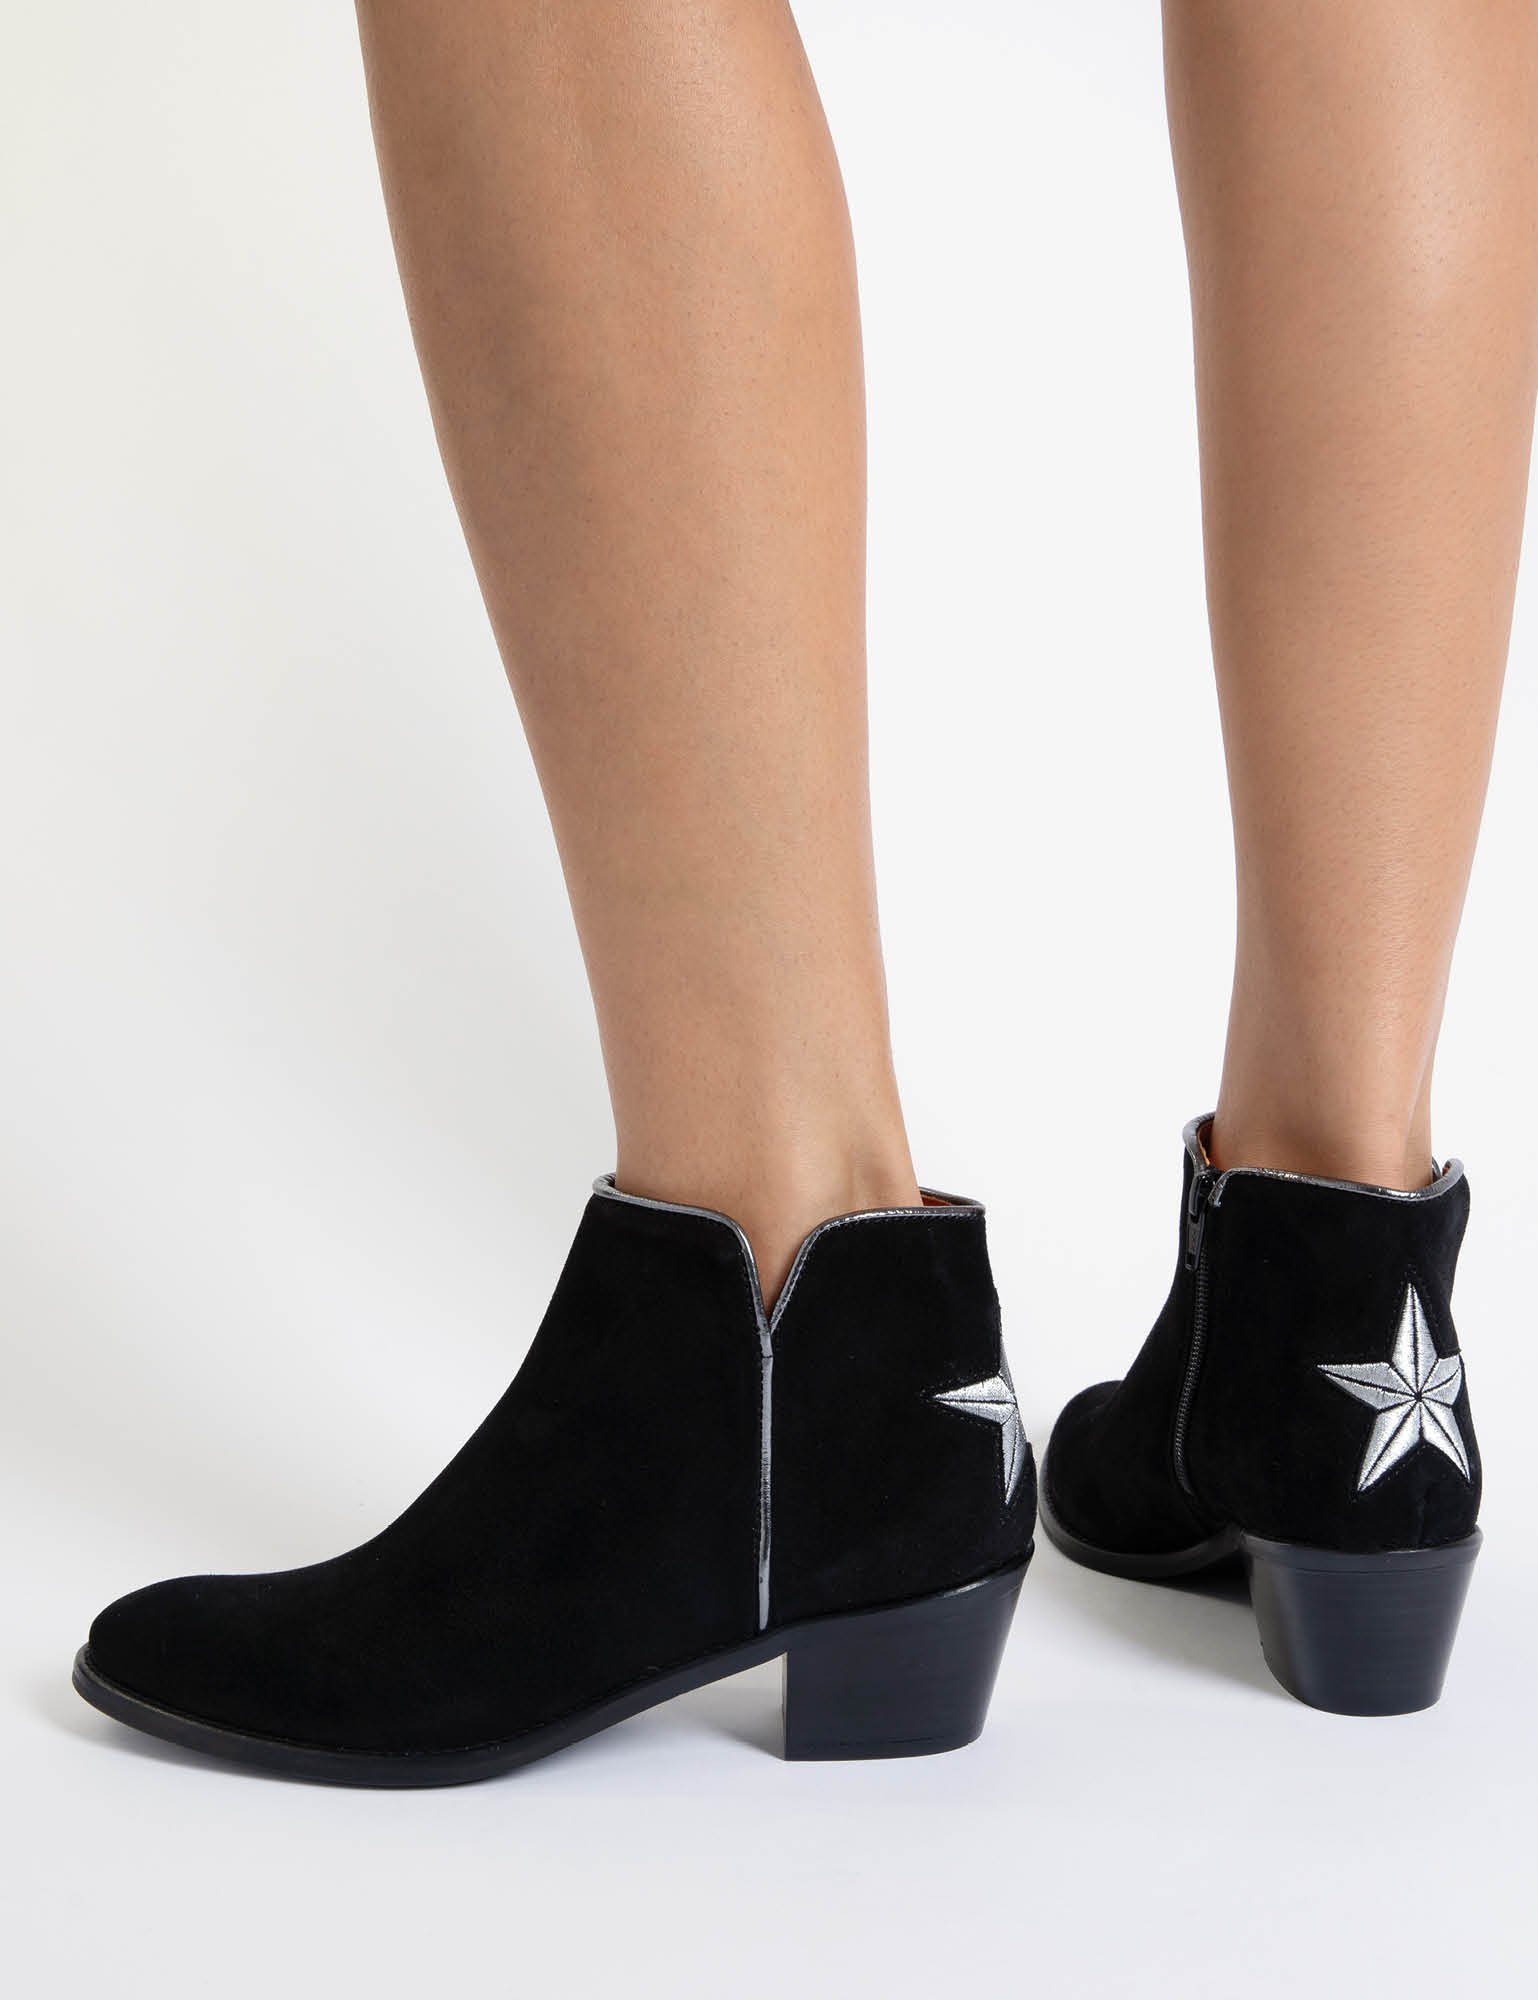 Paco Star Gazer Leather Boot - Black | Women's Boot | Penelope Chilvers